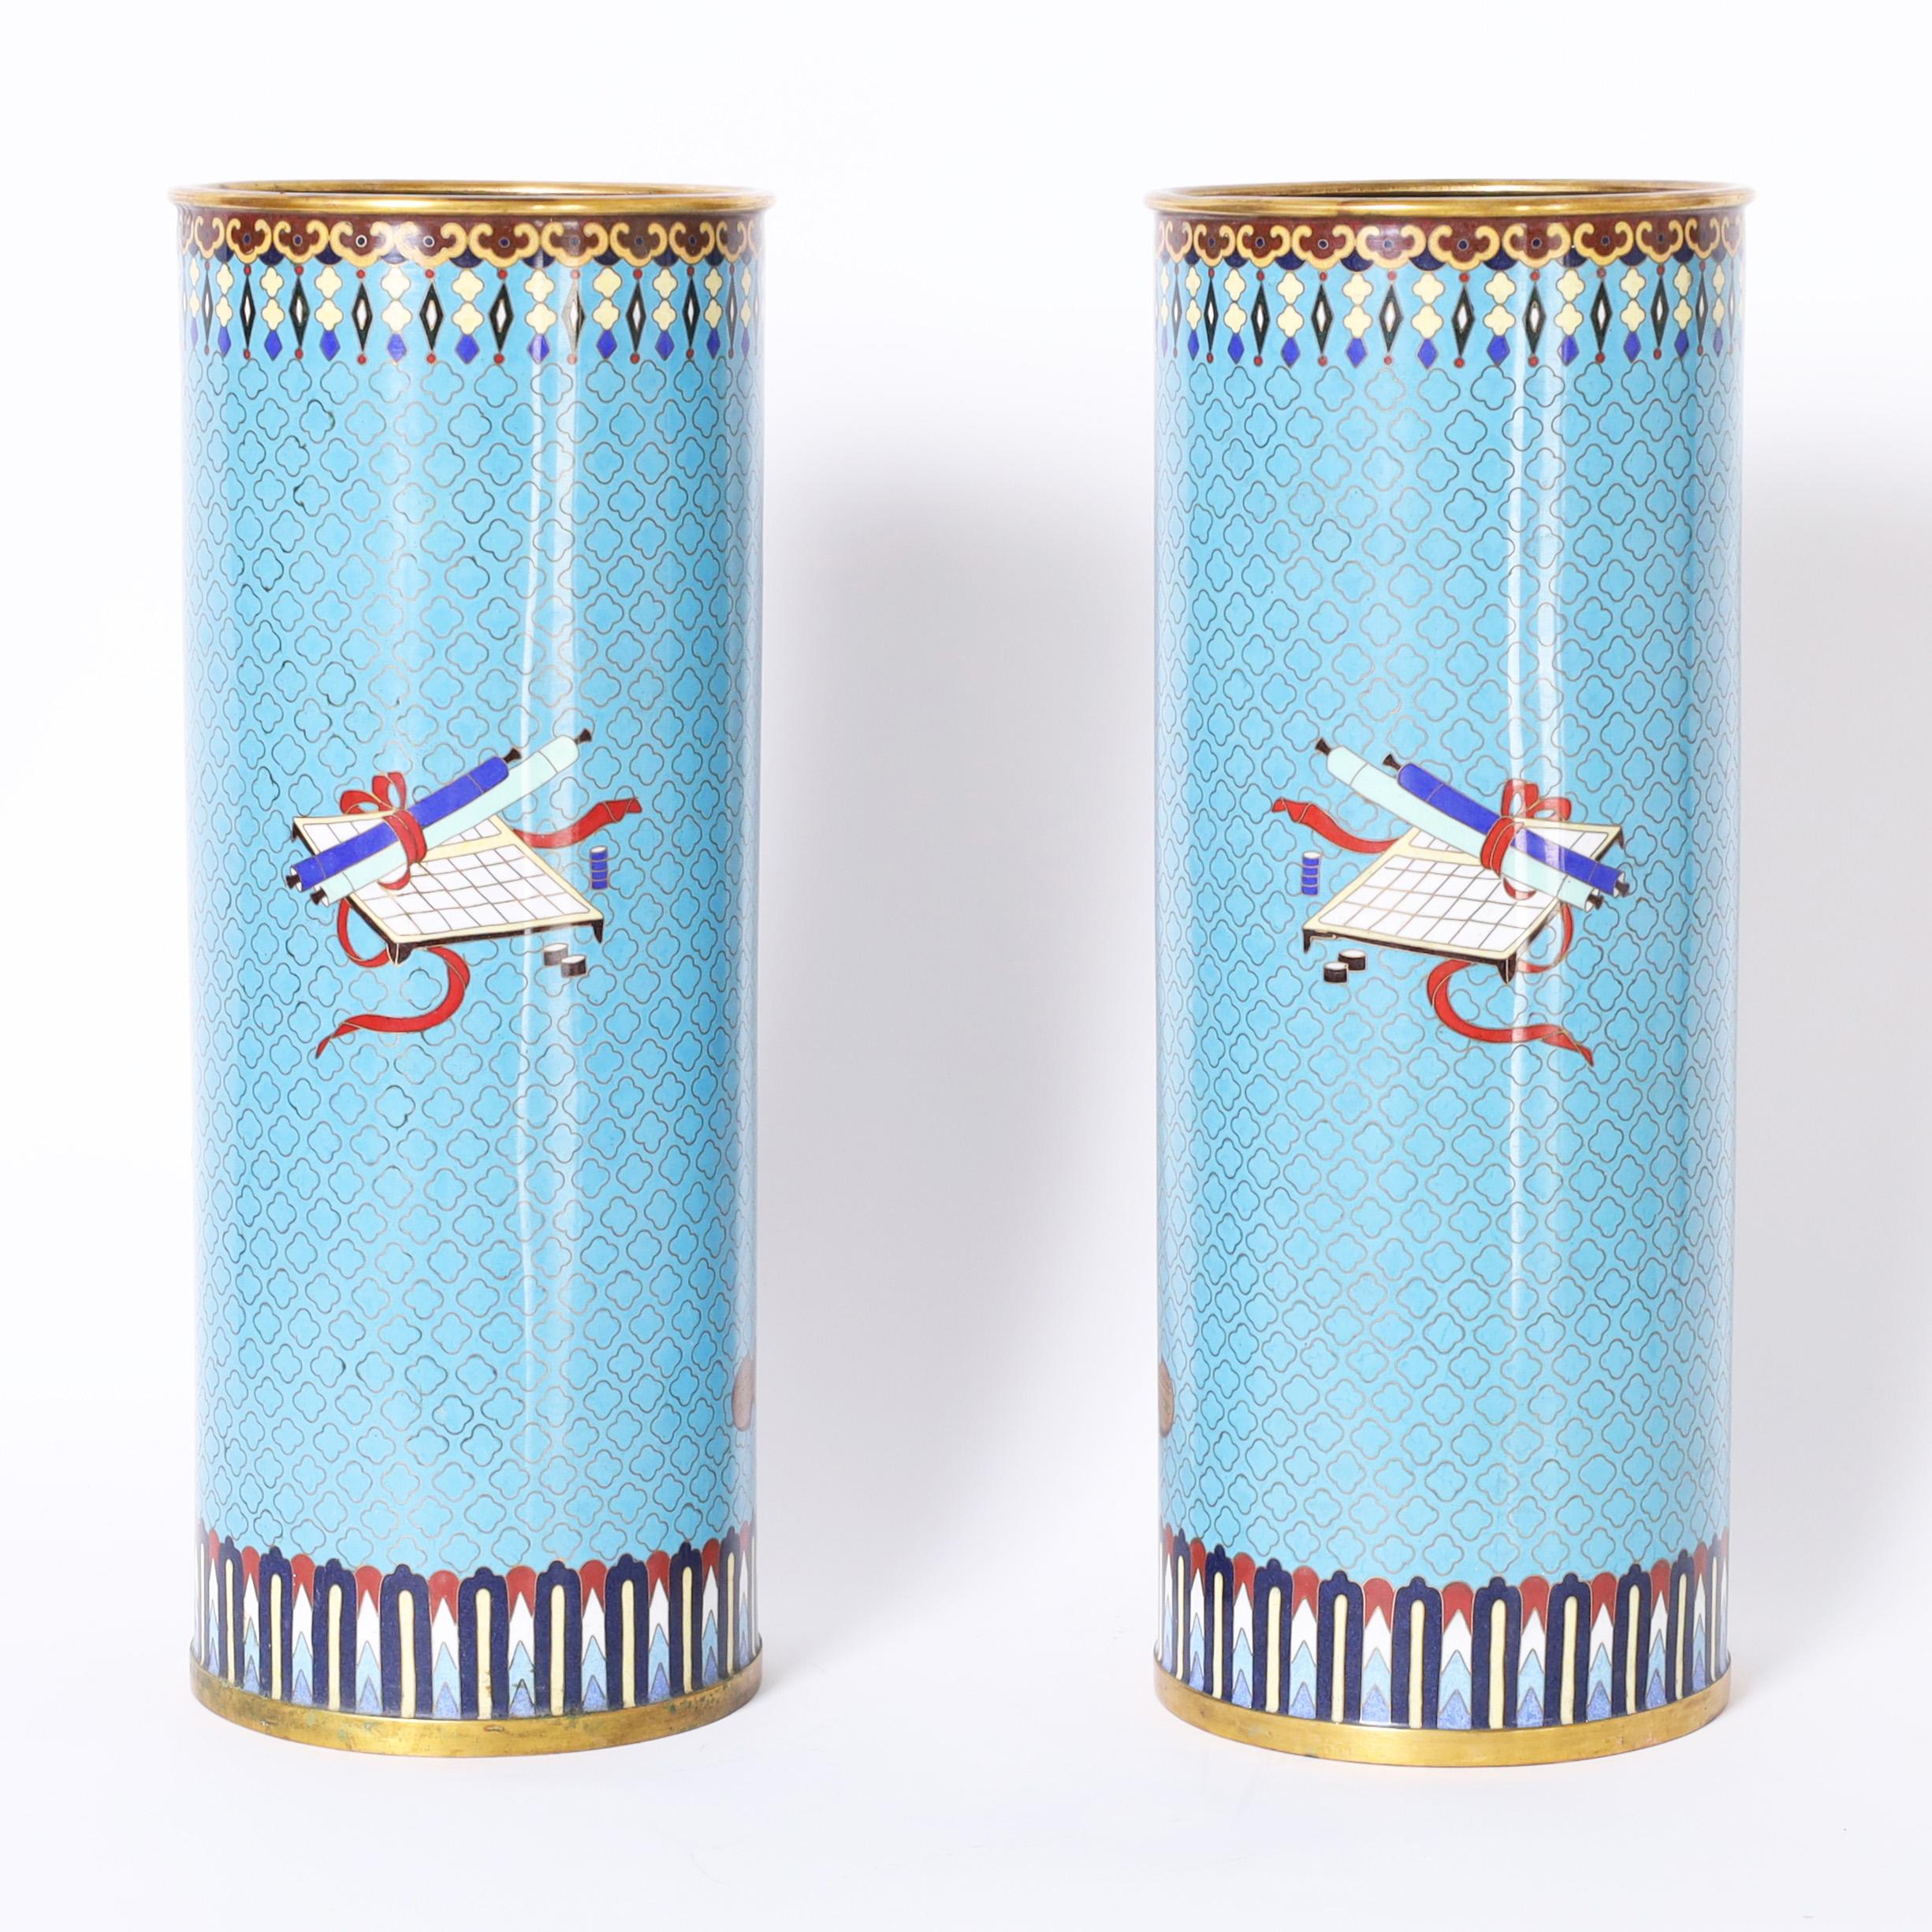 True pair of antique Chinese cloisonne vases decorated in an unusual composition depicting flowers in a stand against an alluring blue field with geometric borders.